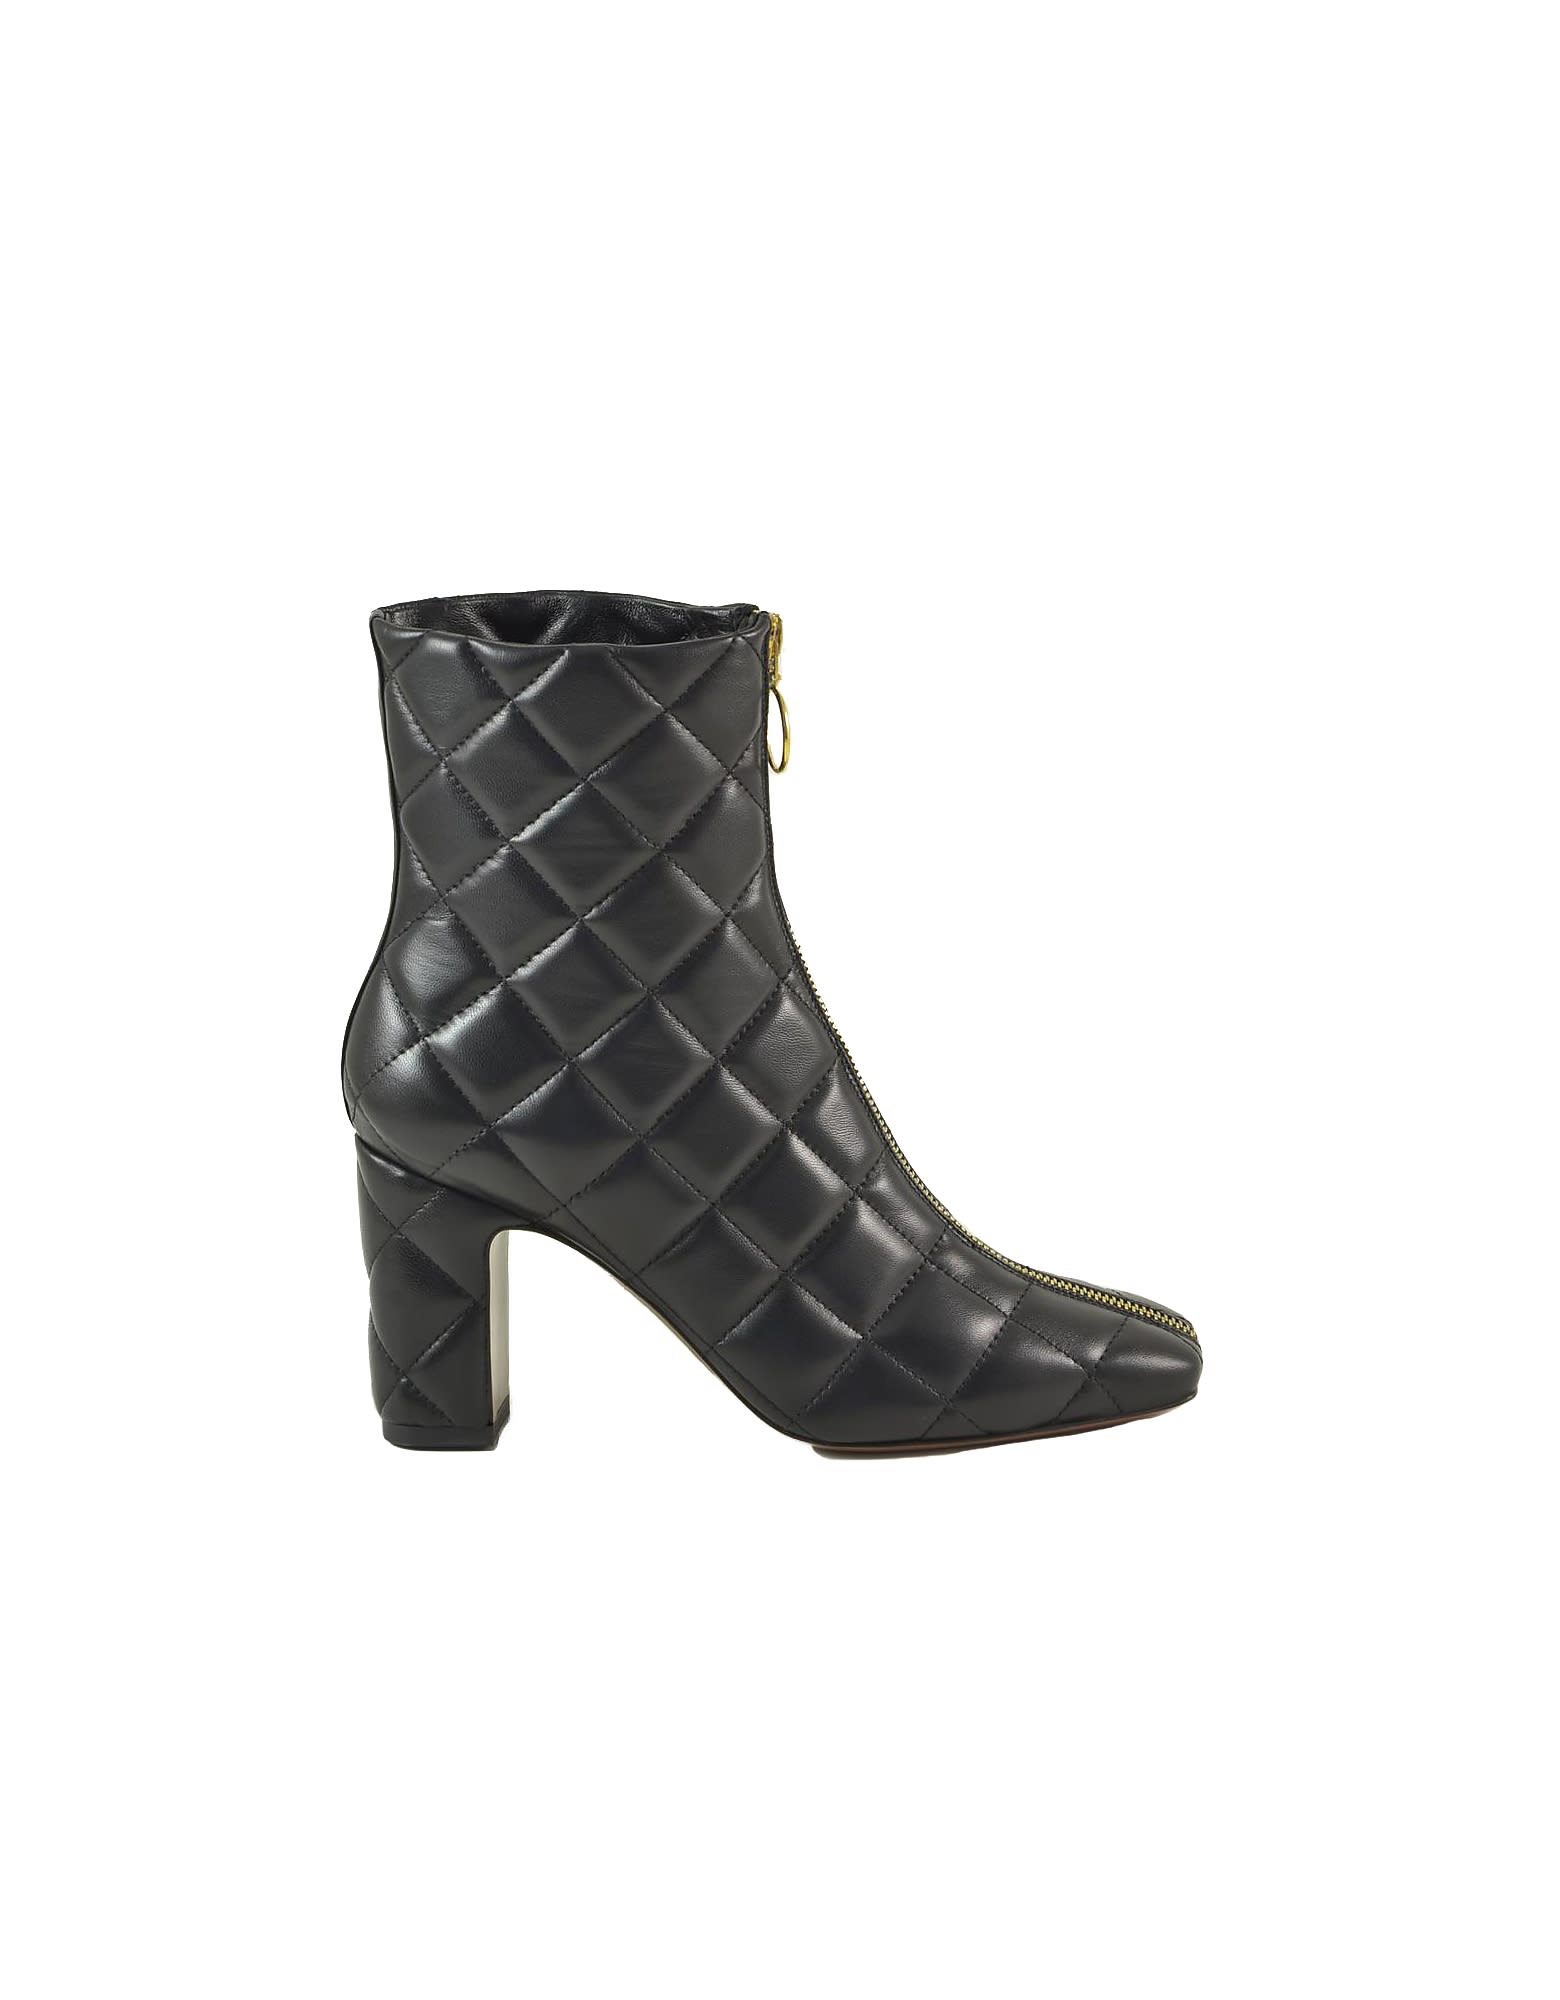 Lautre Chose Black Quilted Leather Booties W/zip